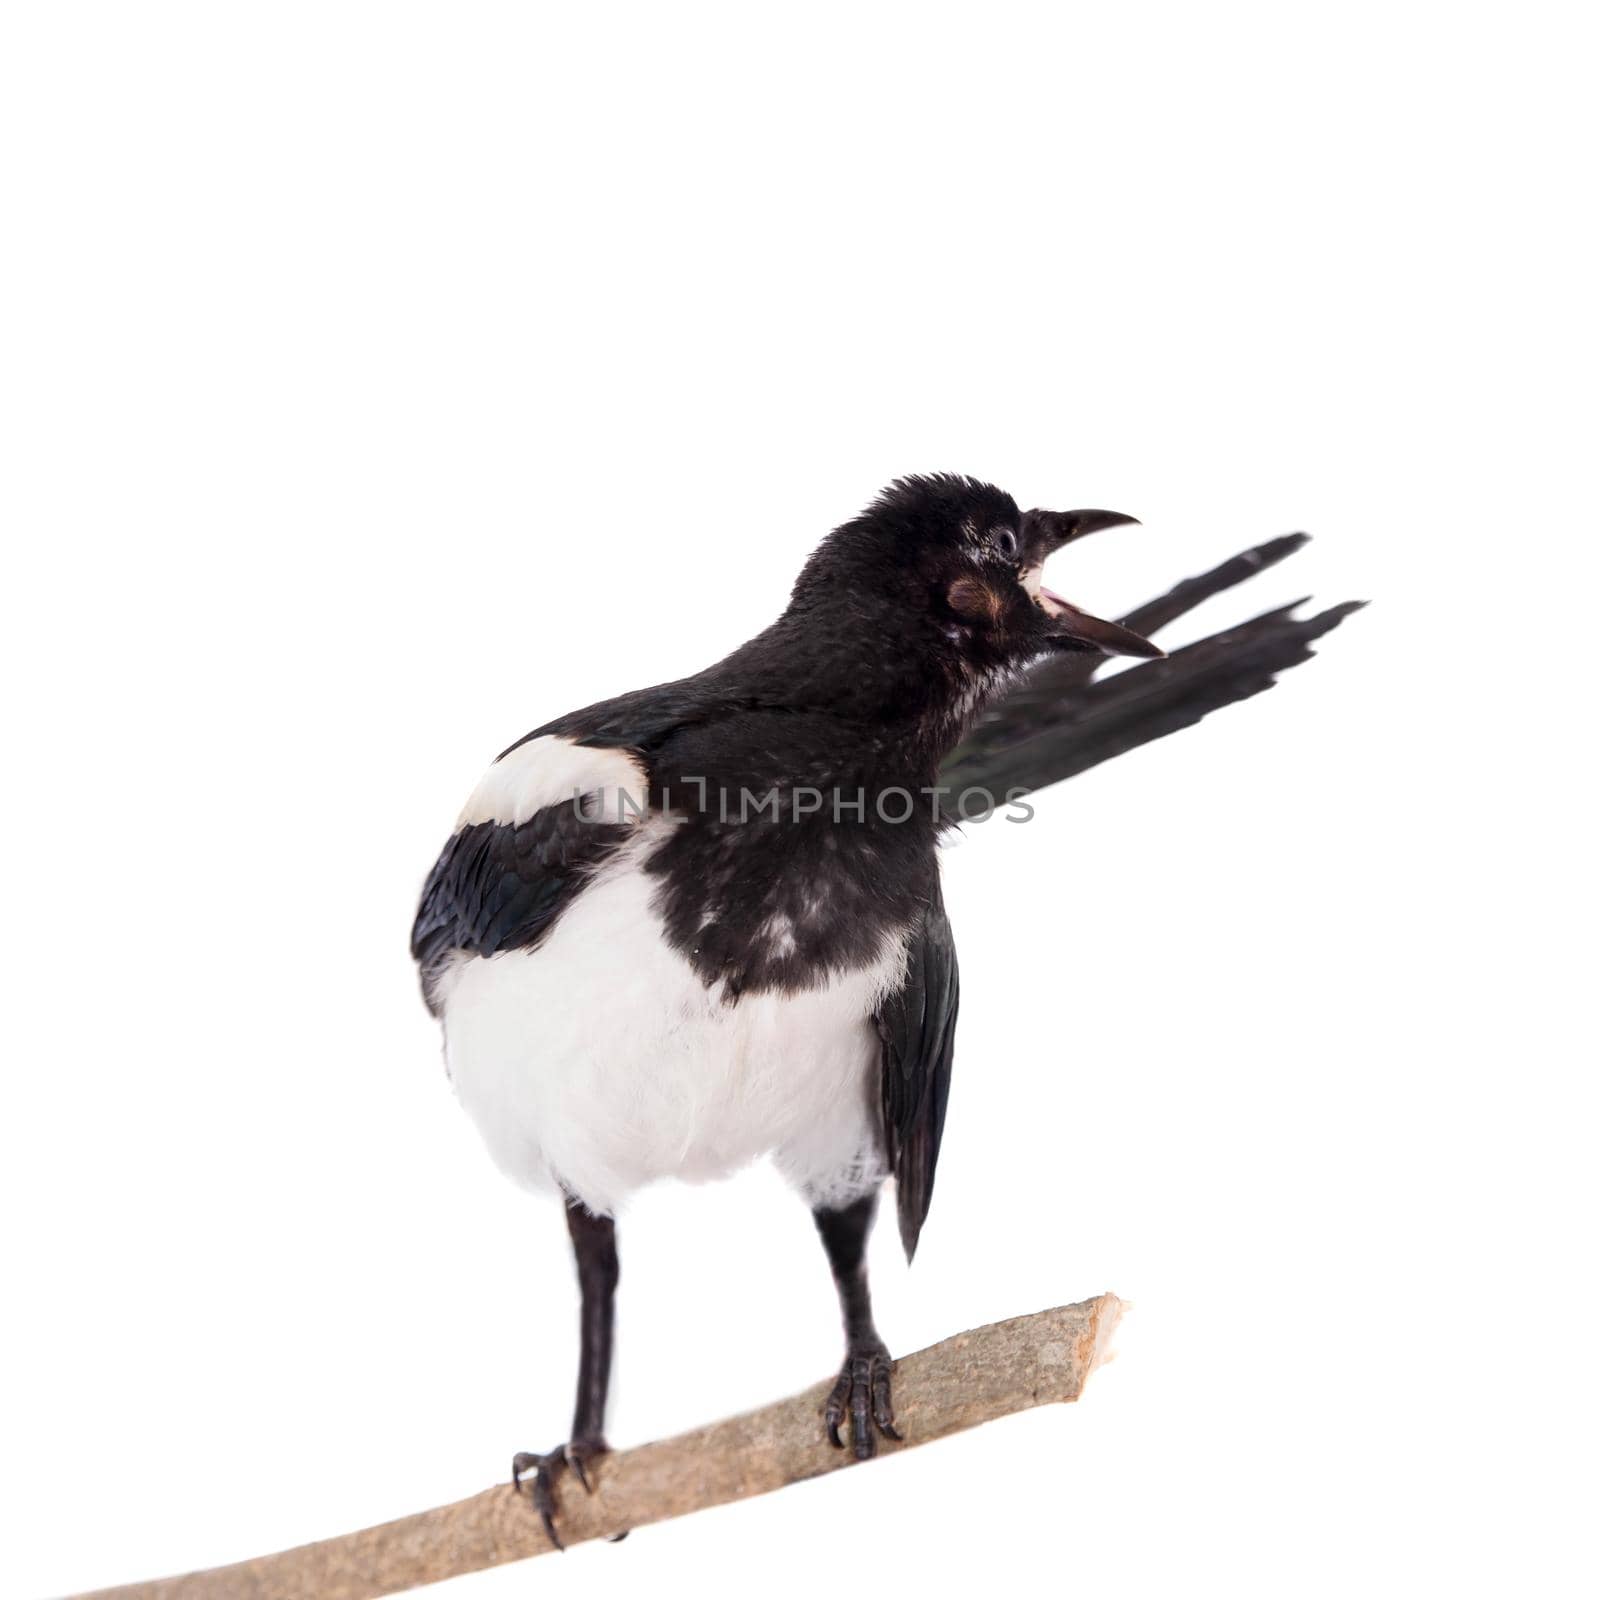 Common Magpie, Pica pica, isolated on white background